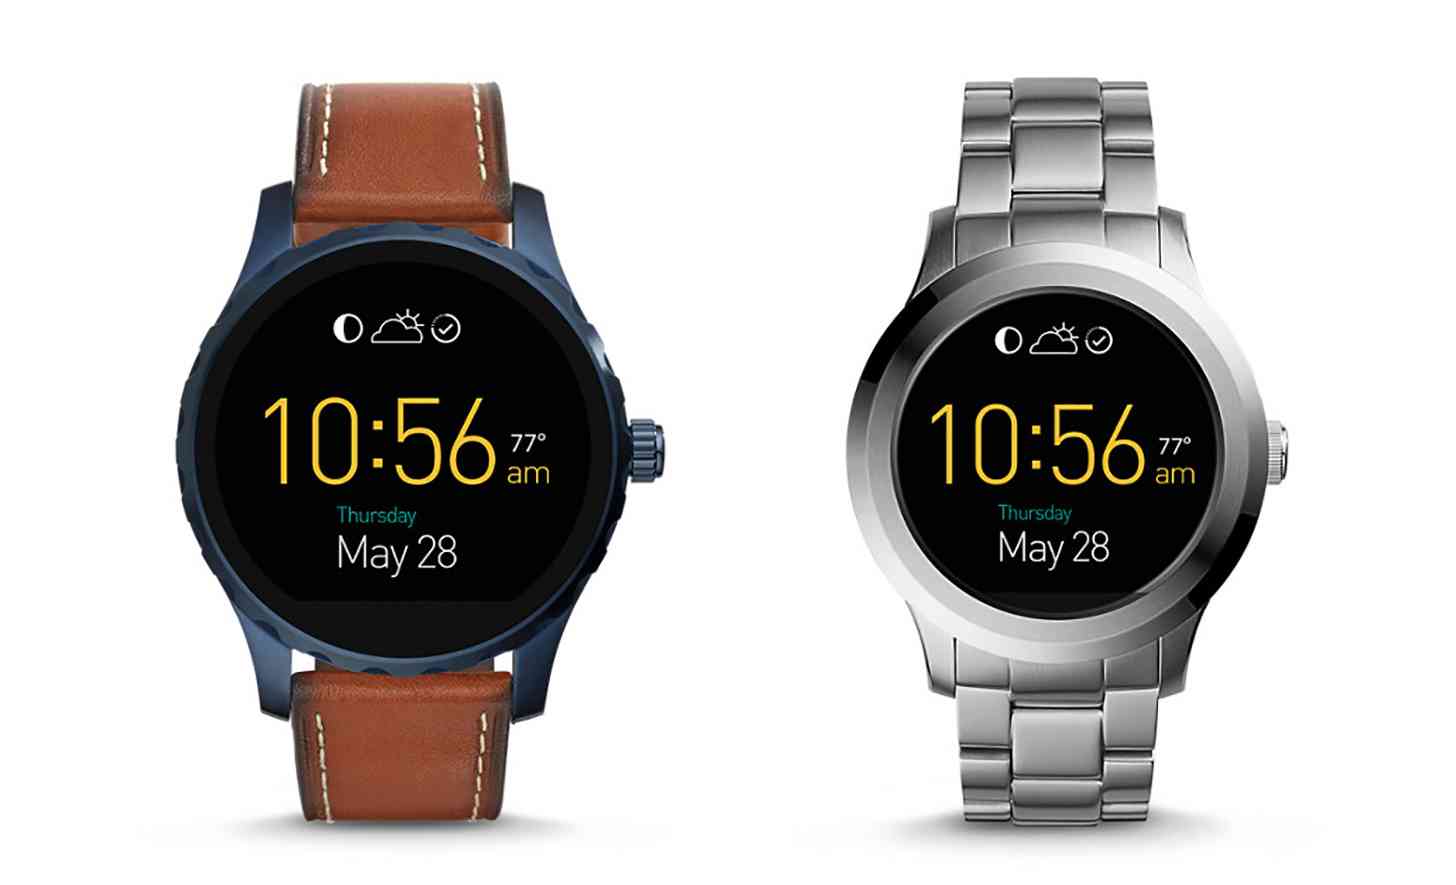 Fossil Android Wear smartwatches